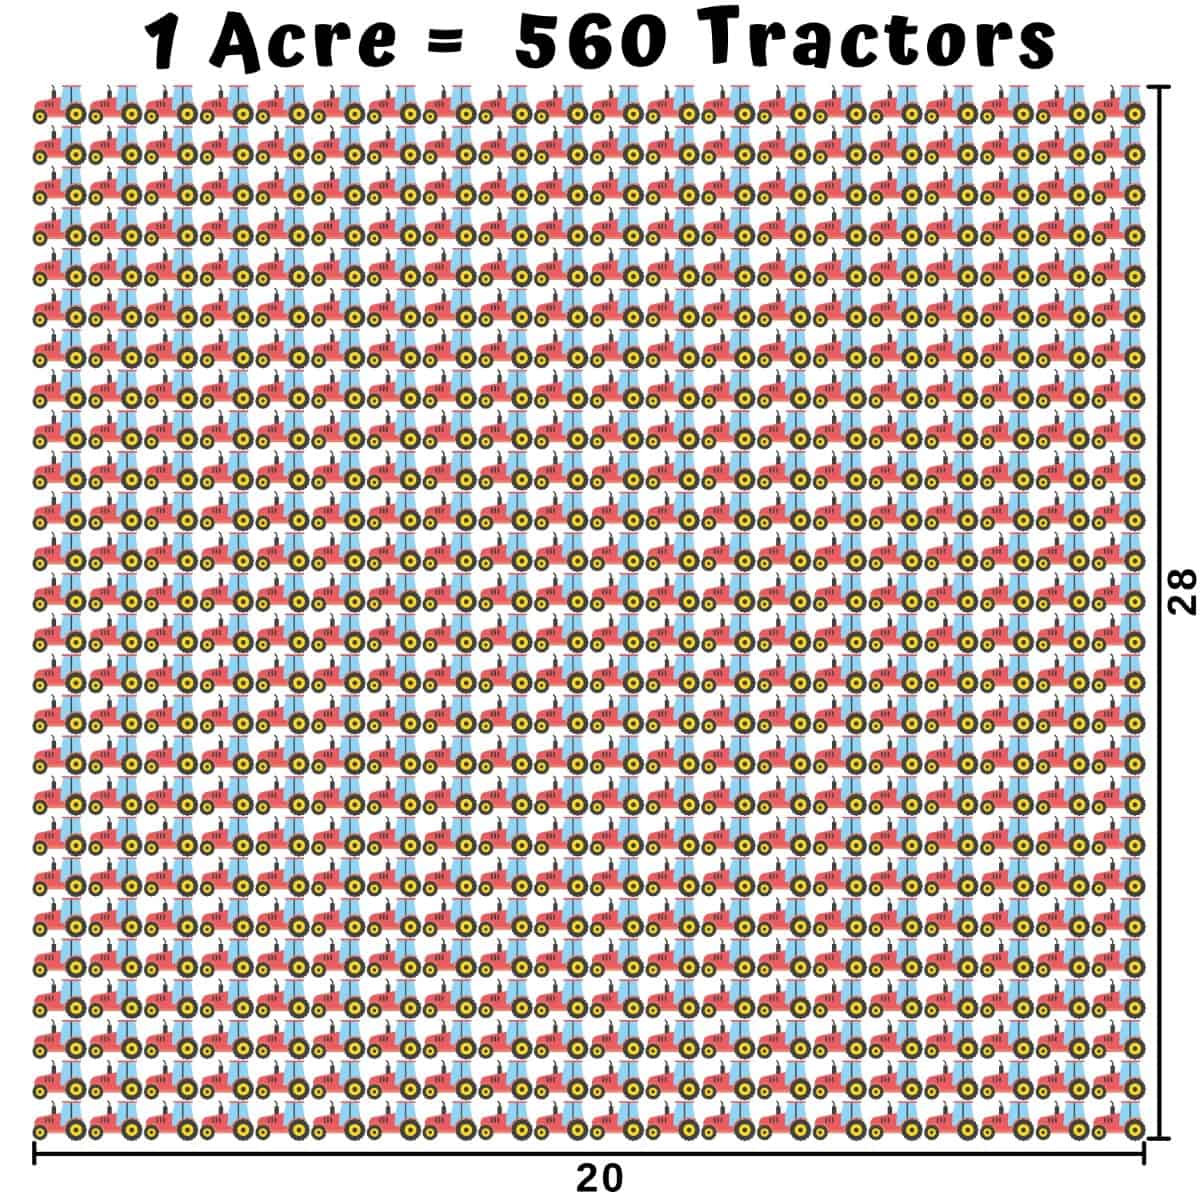 How big is an Acre - Tractors